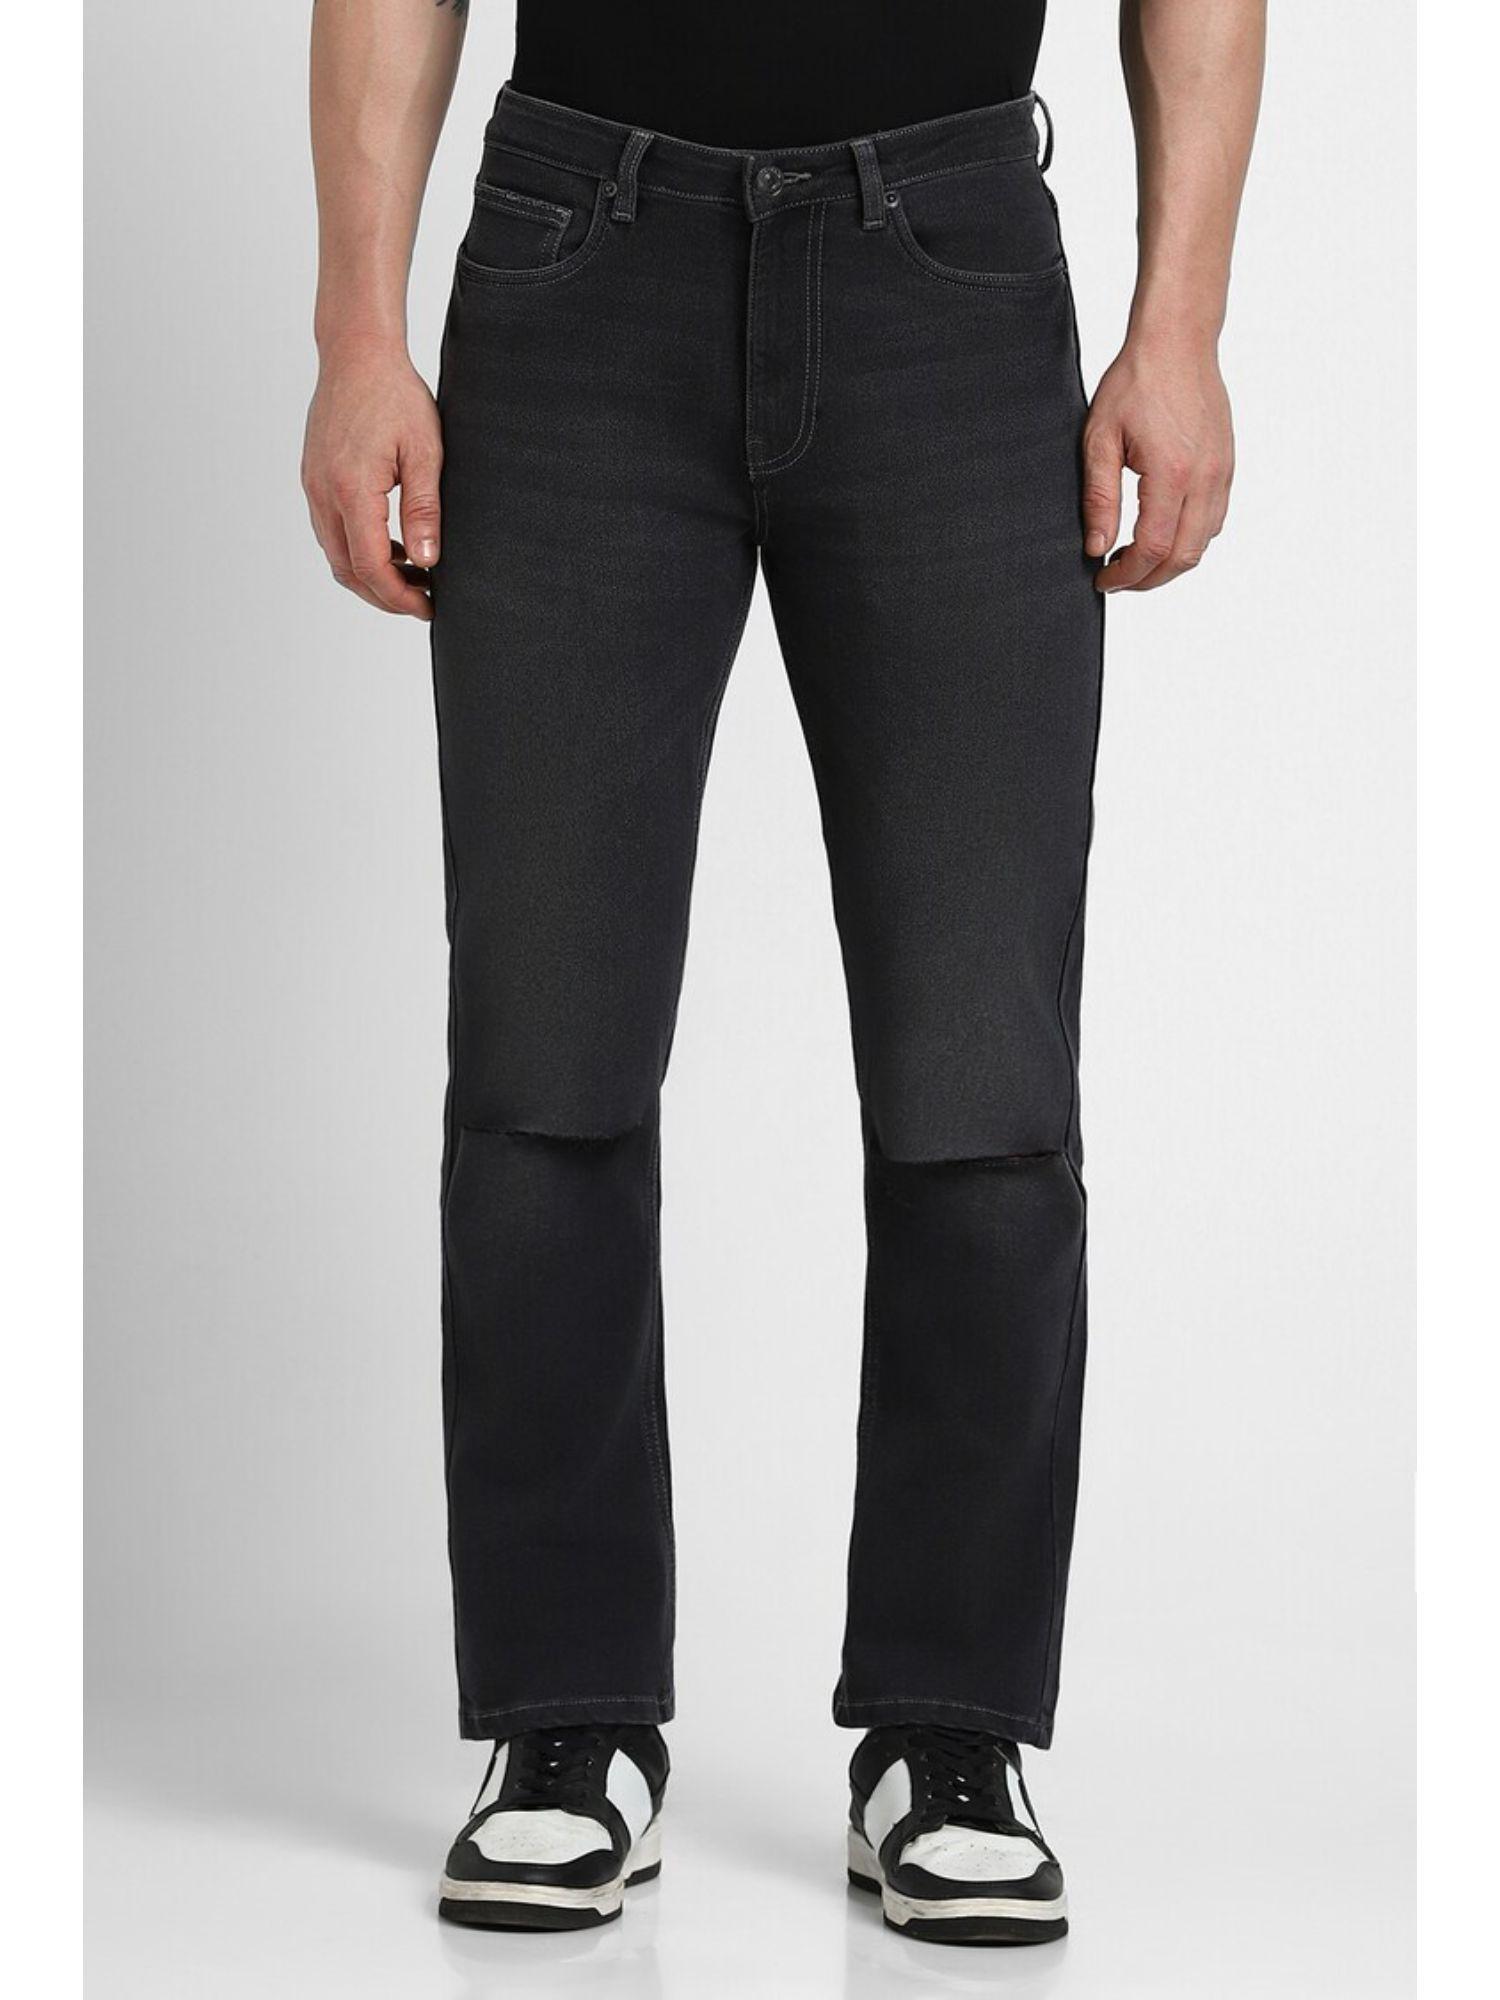 solid-black-straight-fit-jeans